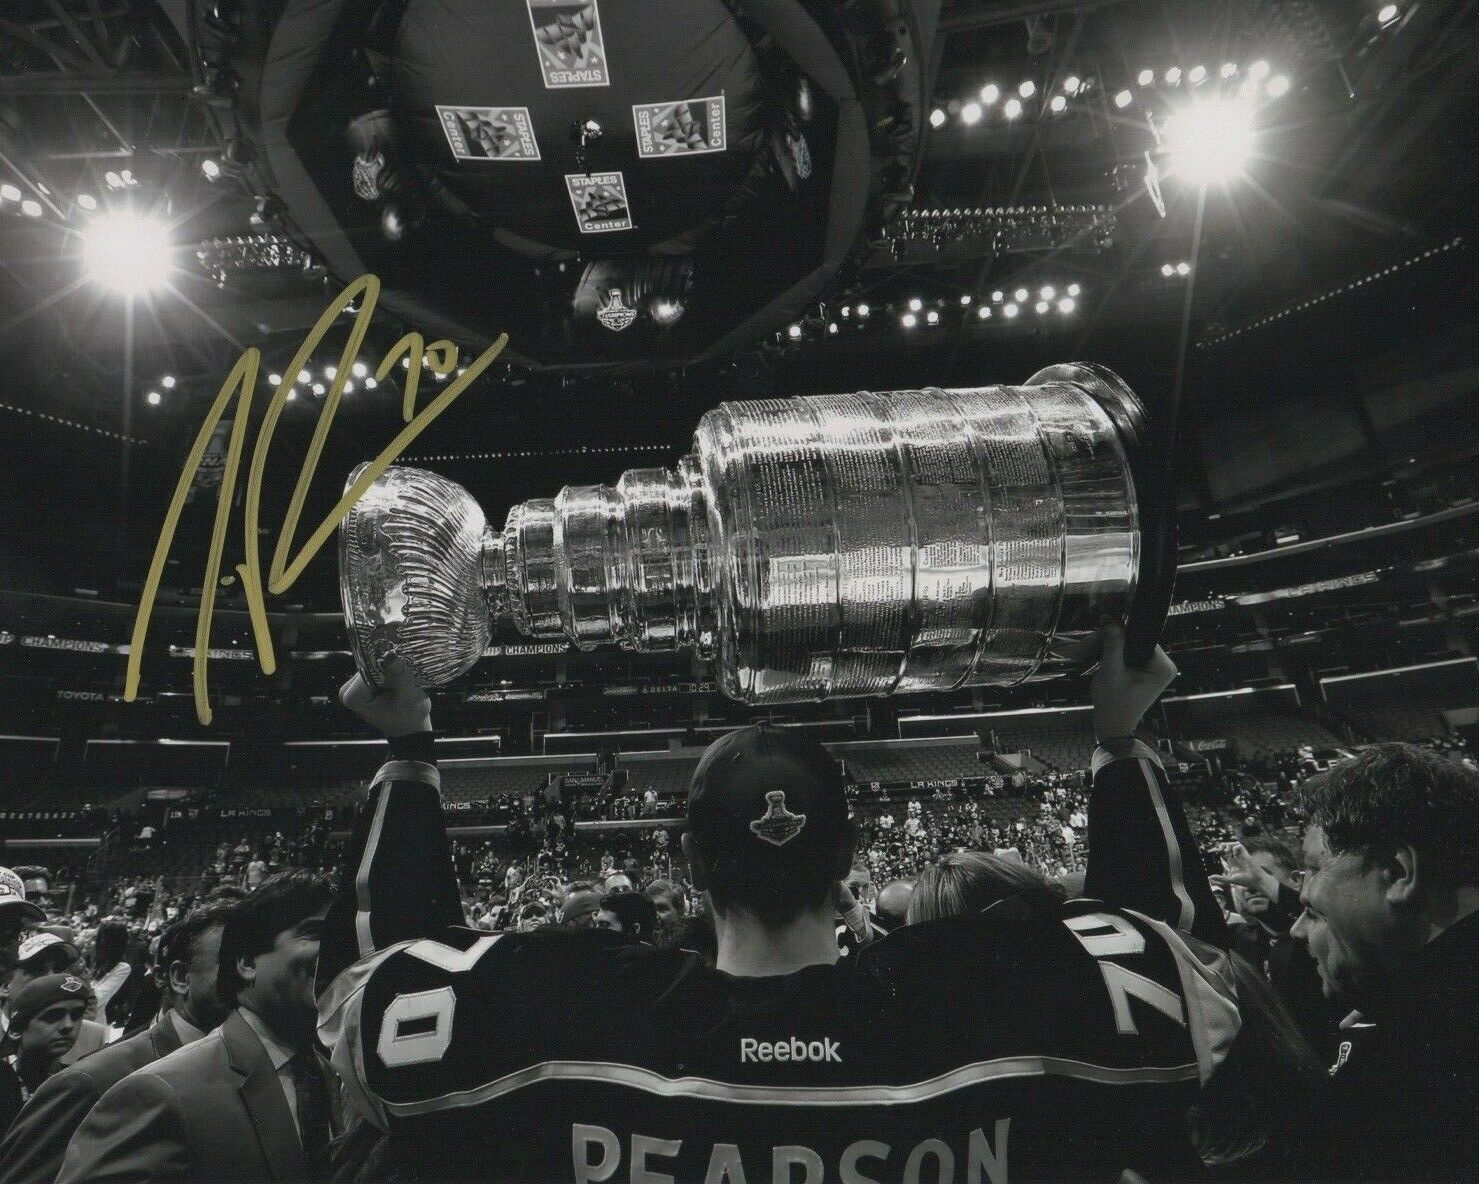 Los Angeles Kings Tanner Pearson Signed Autographed 8x10 NHL Photo Poster painting COA #2